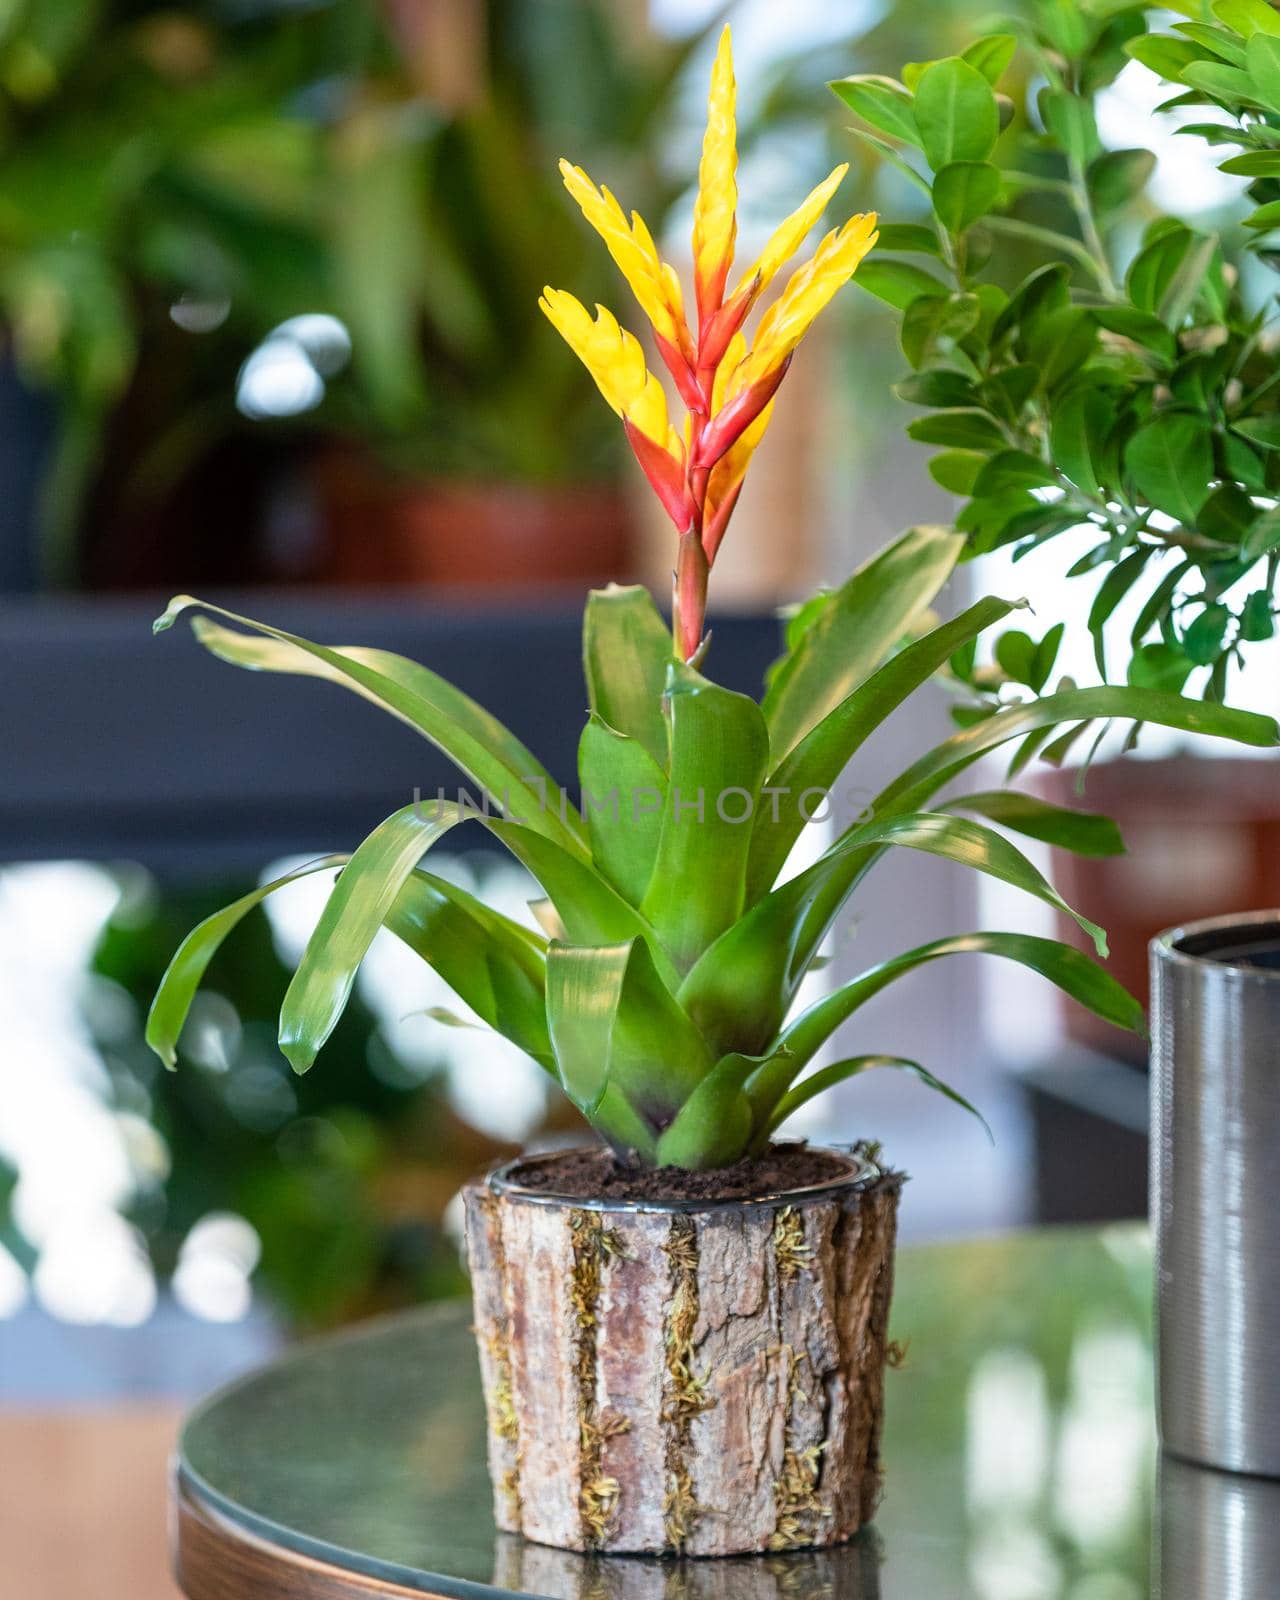 Red Bromeliad flower plant in the wooden pot by ferhad